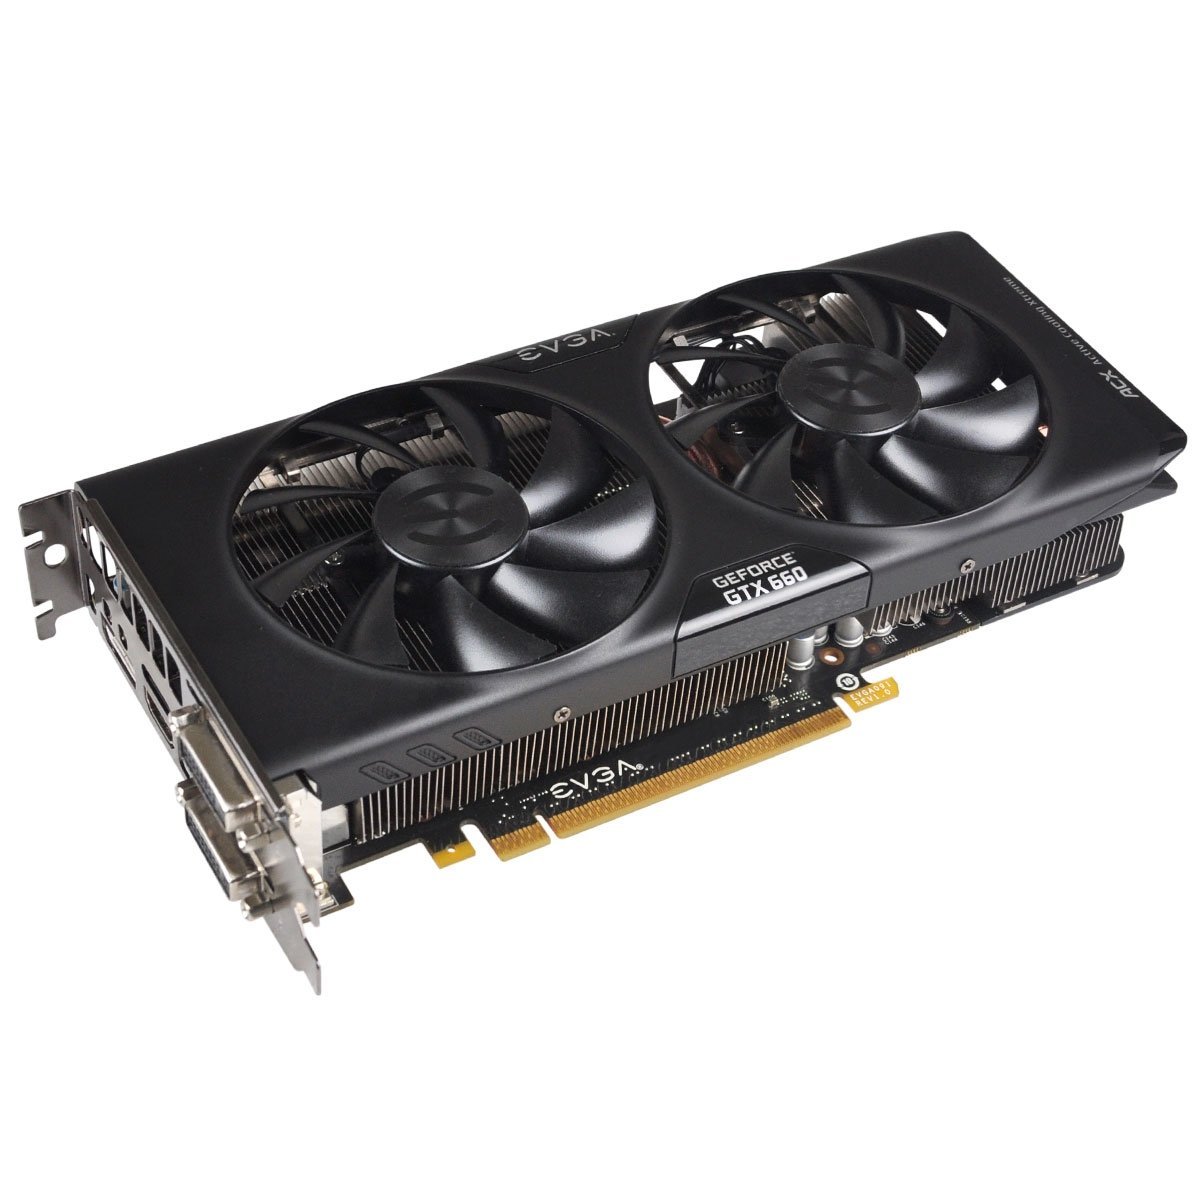 Parity Nvidia Gtx 660 2gb Price Up To 77 Off